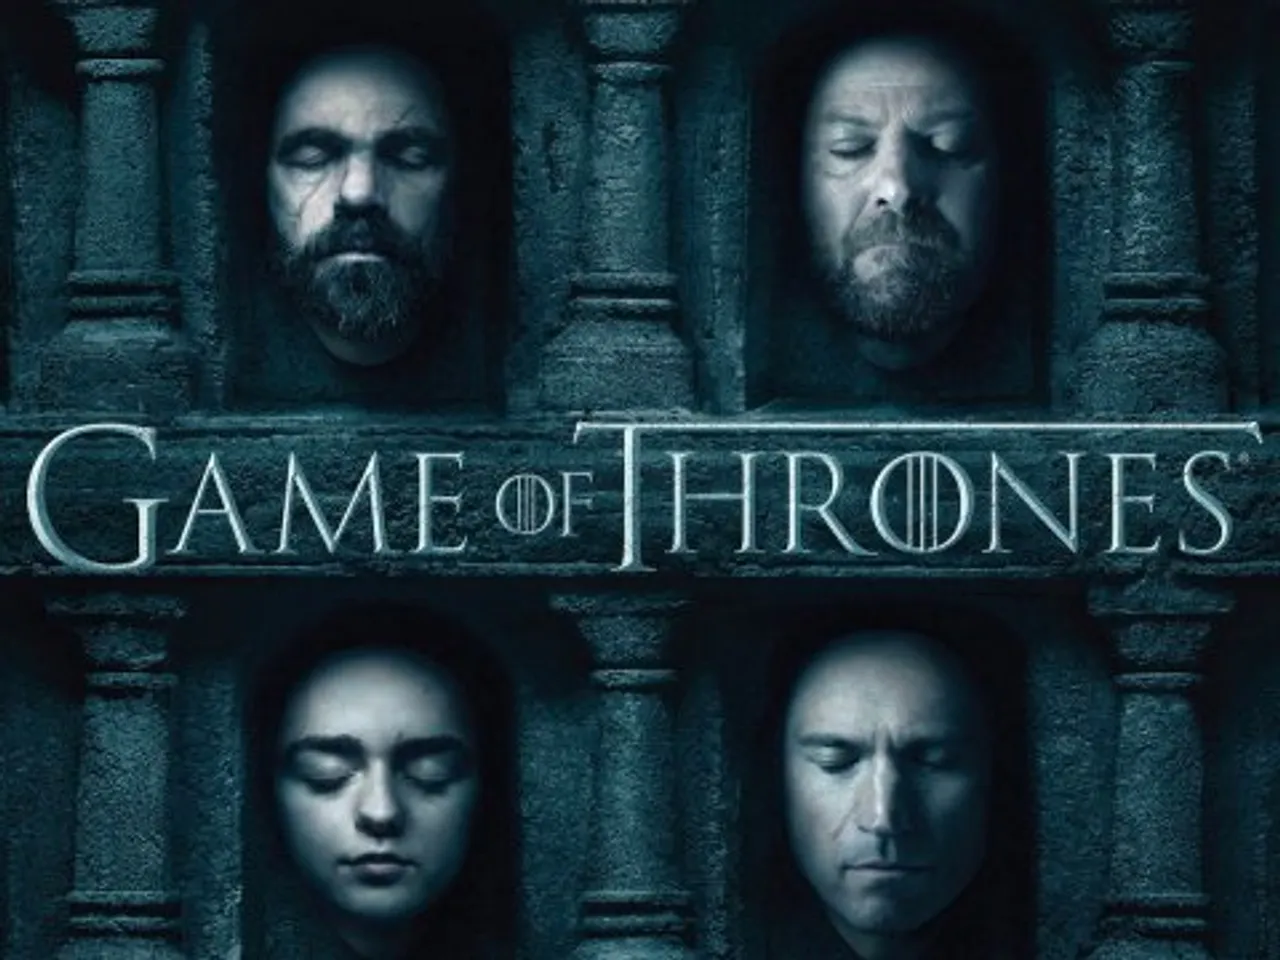 CIOL- HBO hacked; Game of Thrones' episodes leaked online